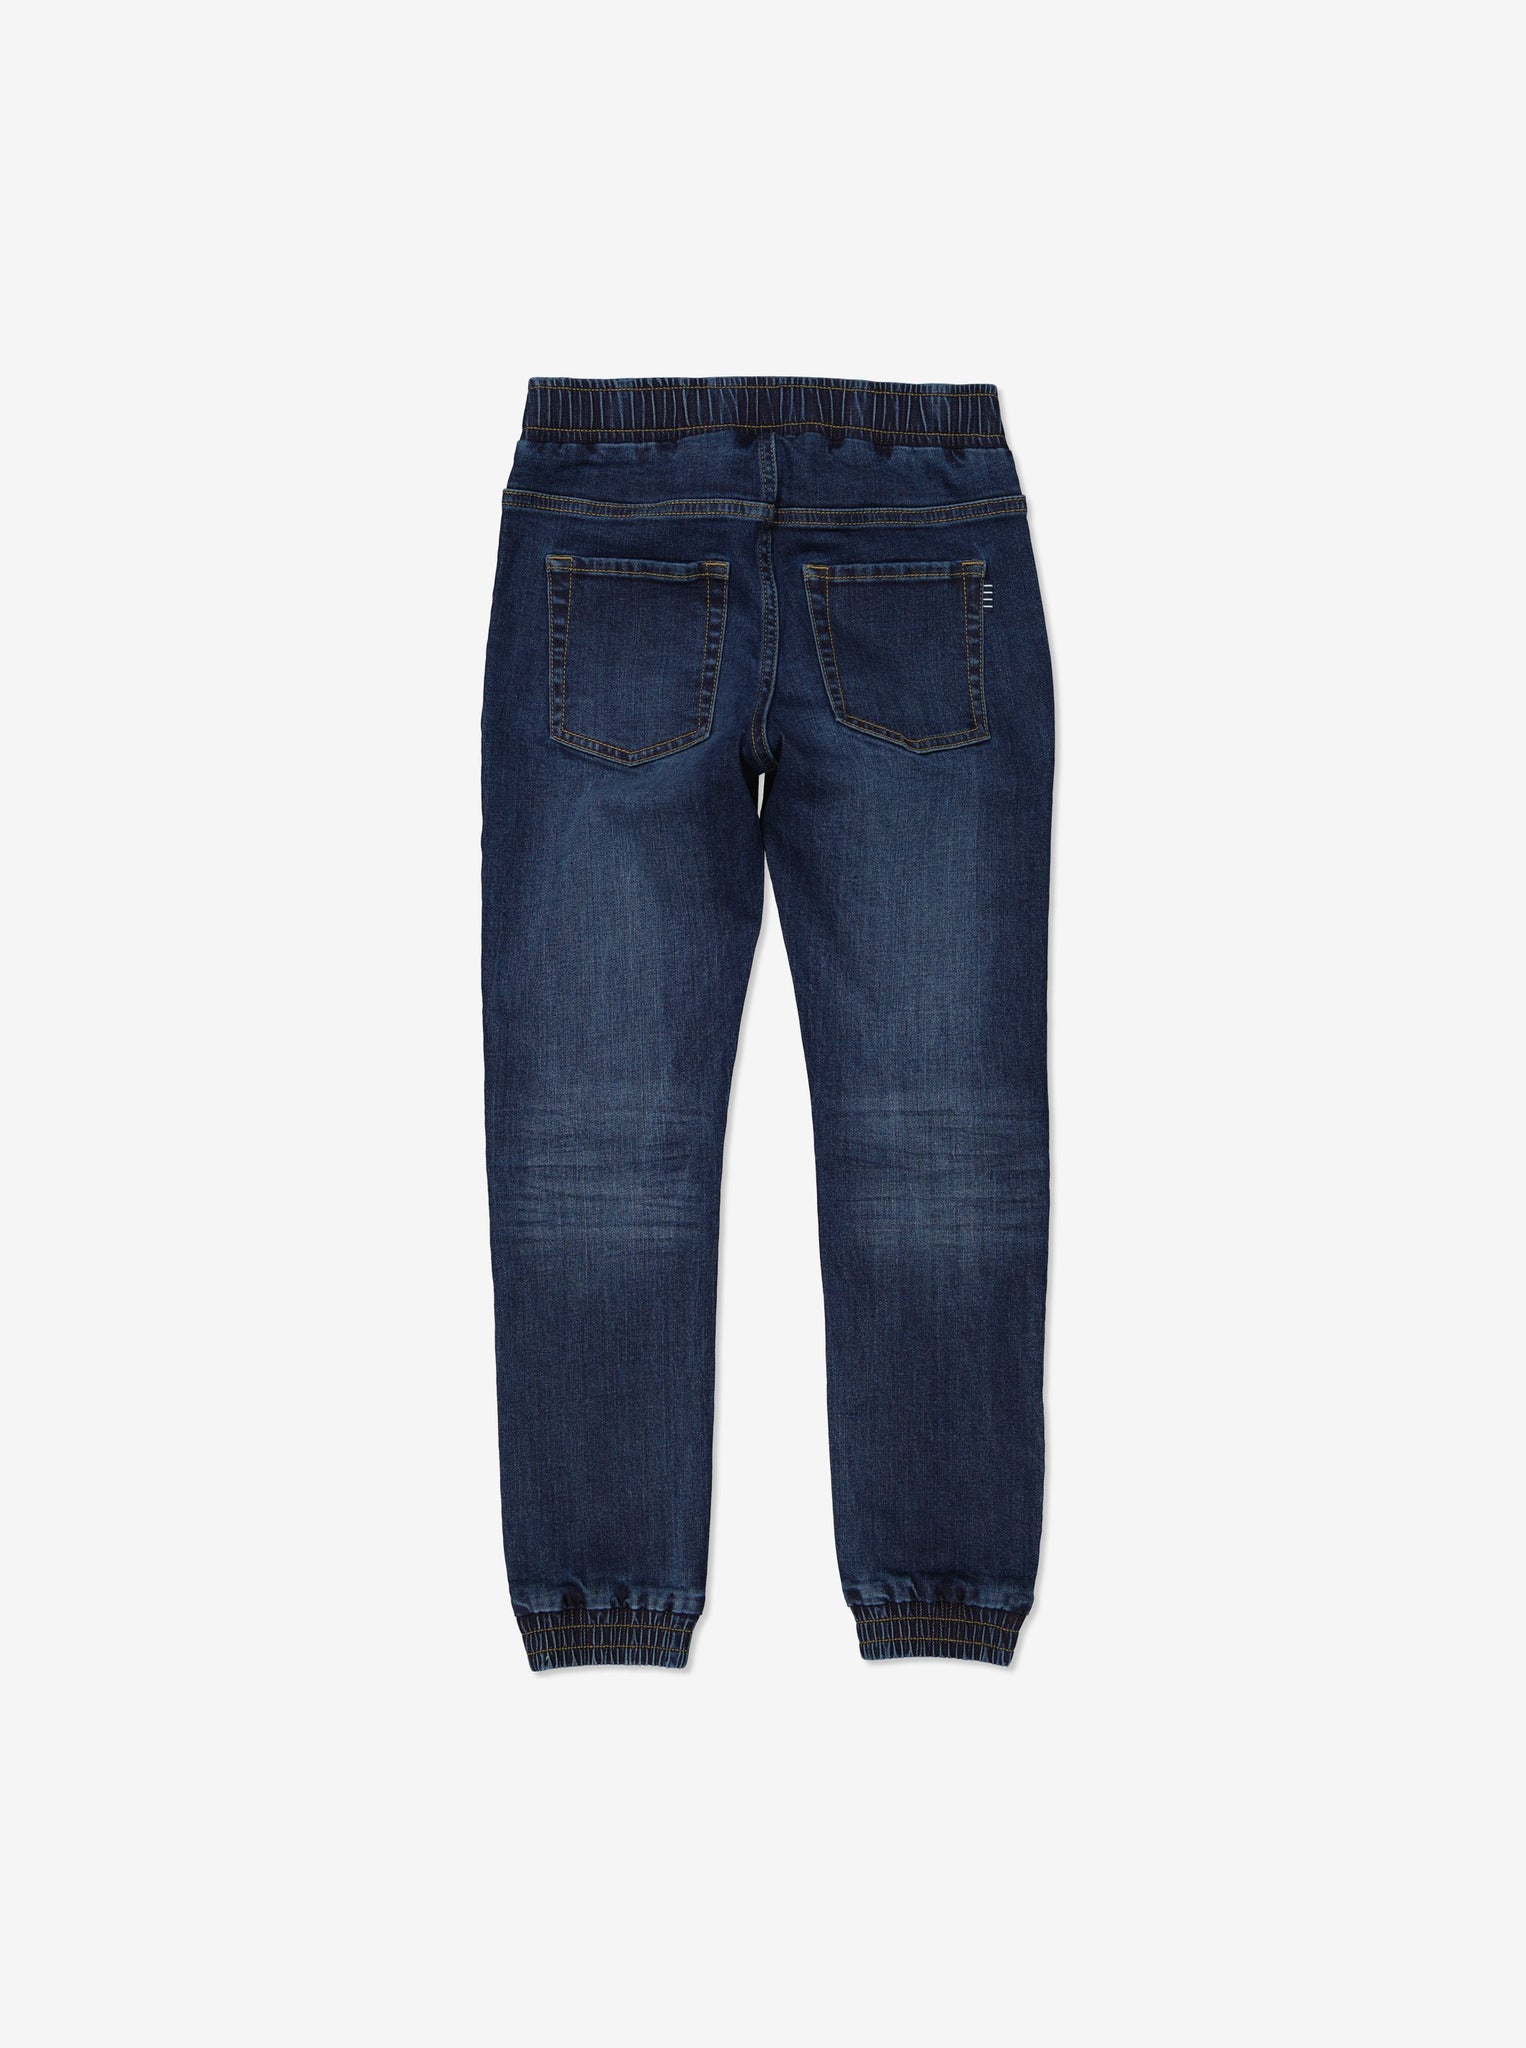  Organic Loose Fit Kids Denim Jeans from Polarn O. Pyret Kidswear. Made from environmentally friendly materials.